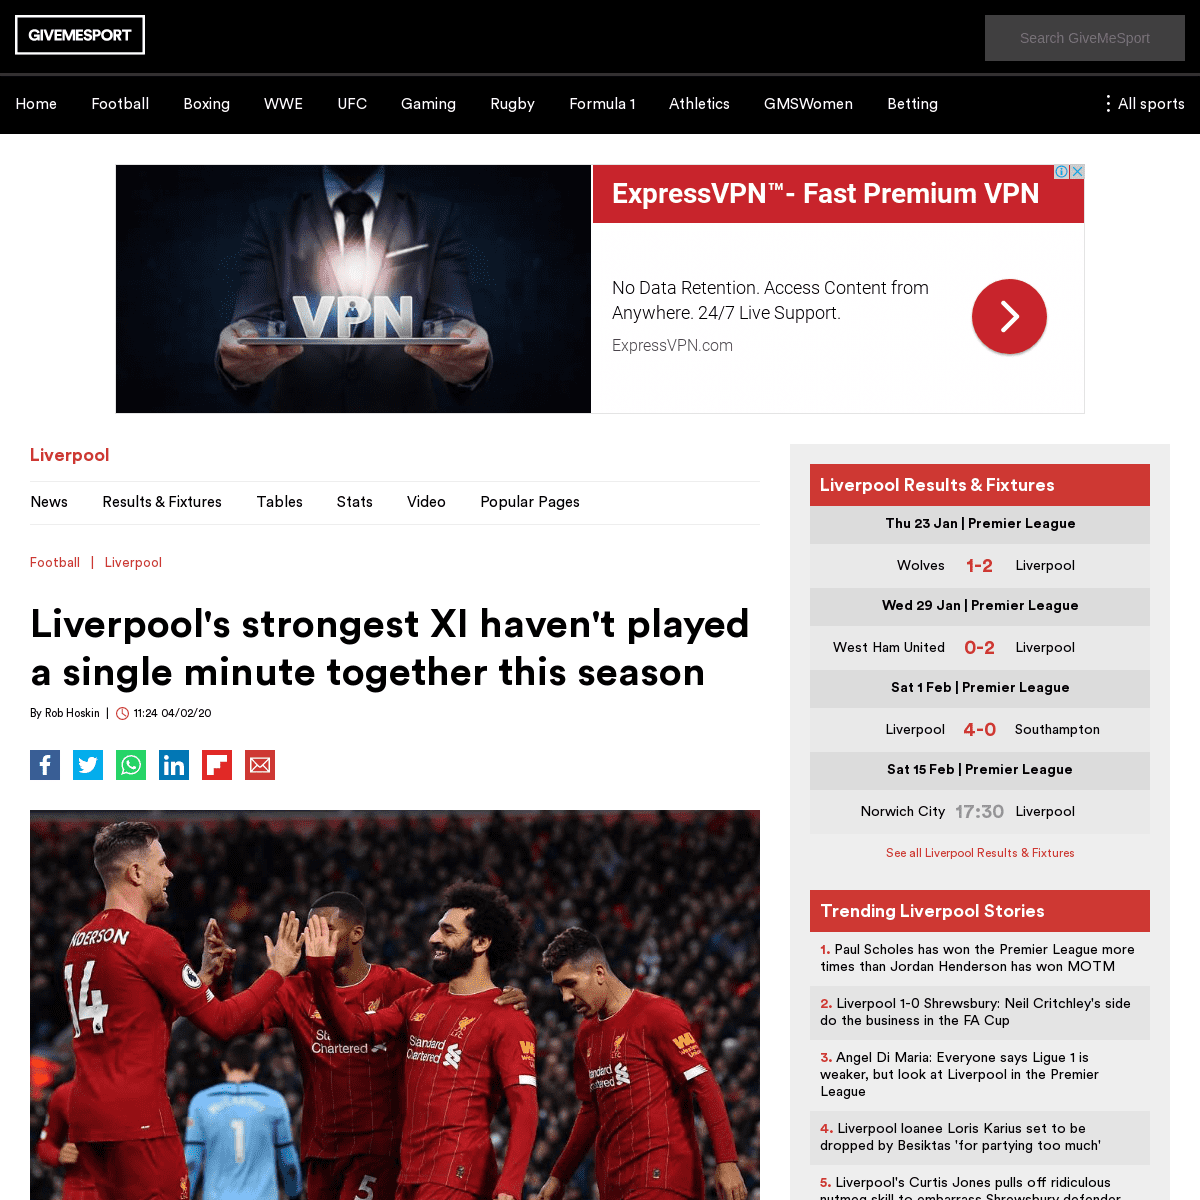 A complete backup of www.givemesport.com/1543941-liverpools-strongest-xi-havent-played-a-single-minute-together-this-season